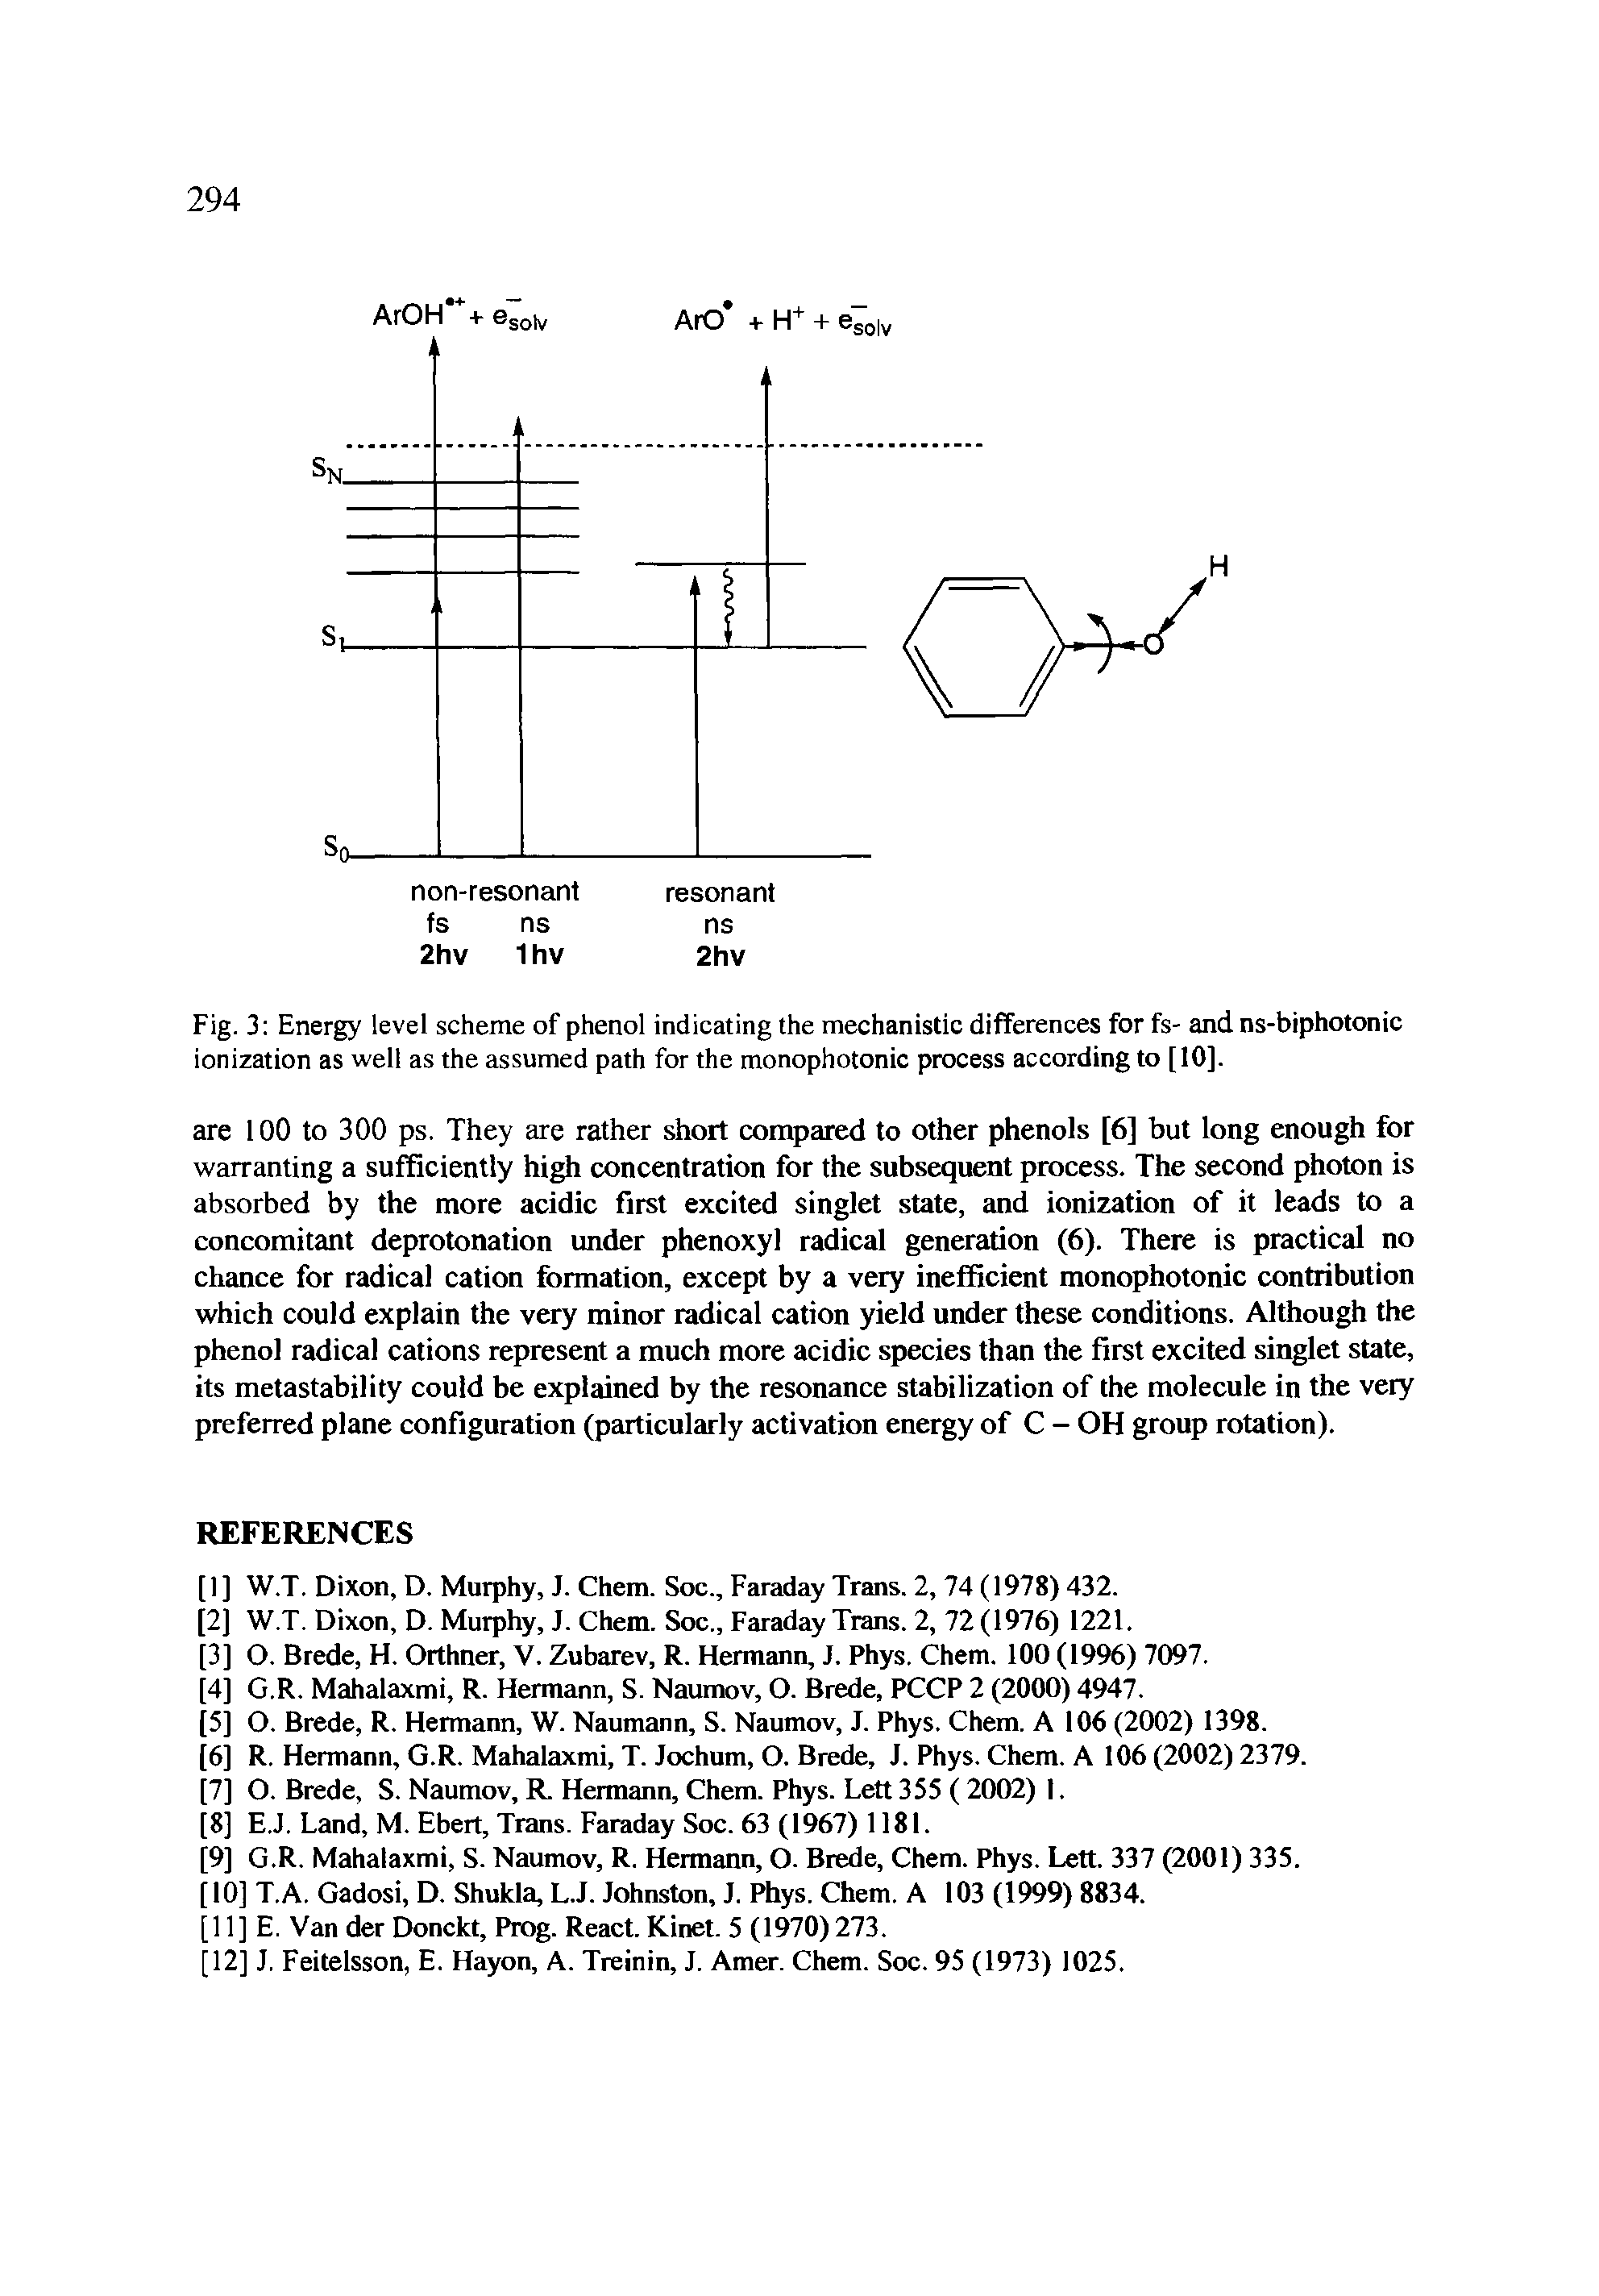 Fig. 3 Energy level scheme of phenol indicating the mechanistic differences for fs- and ns-biphotonic ionization as well as the assumed path for the monophotonic process according to [10].